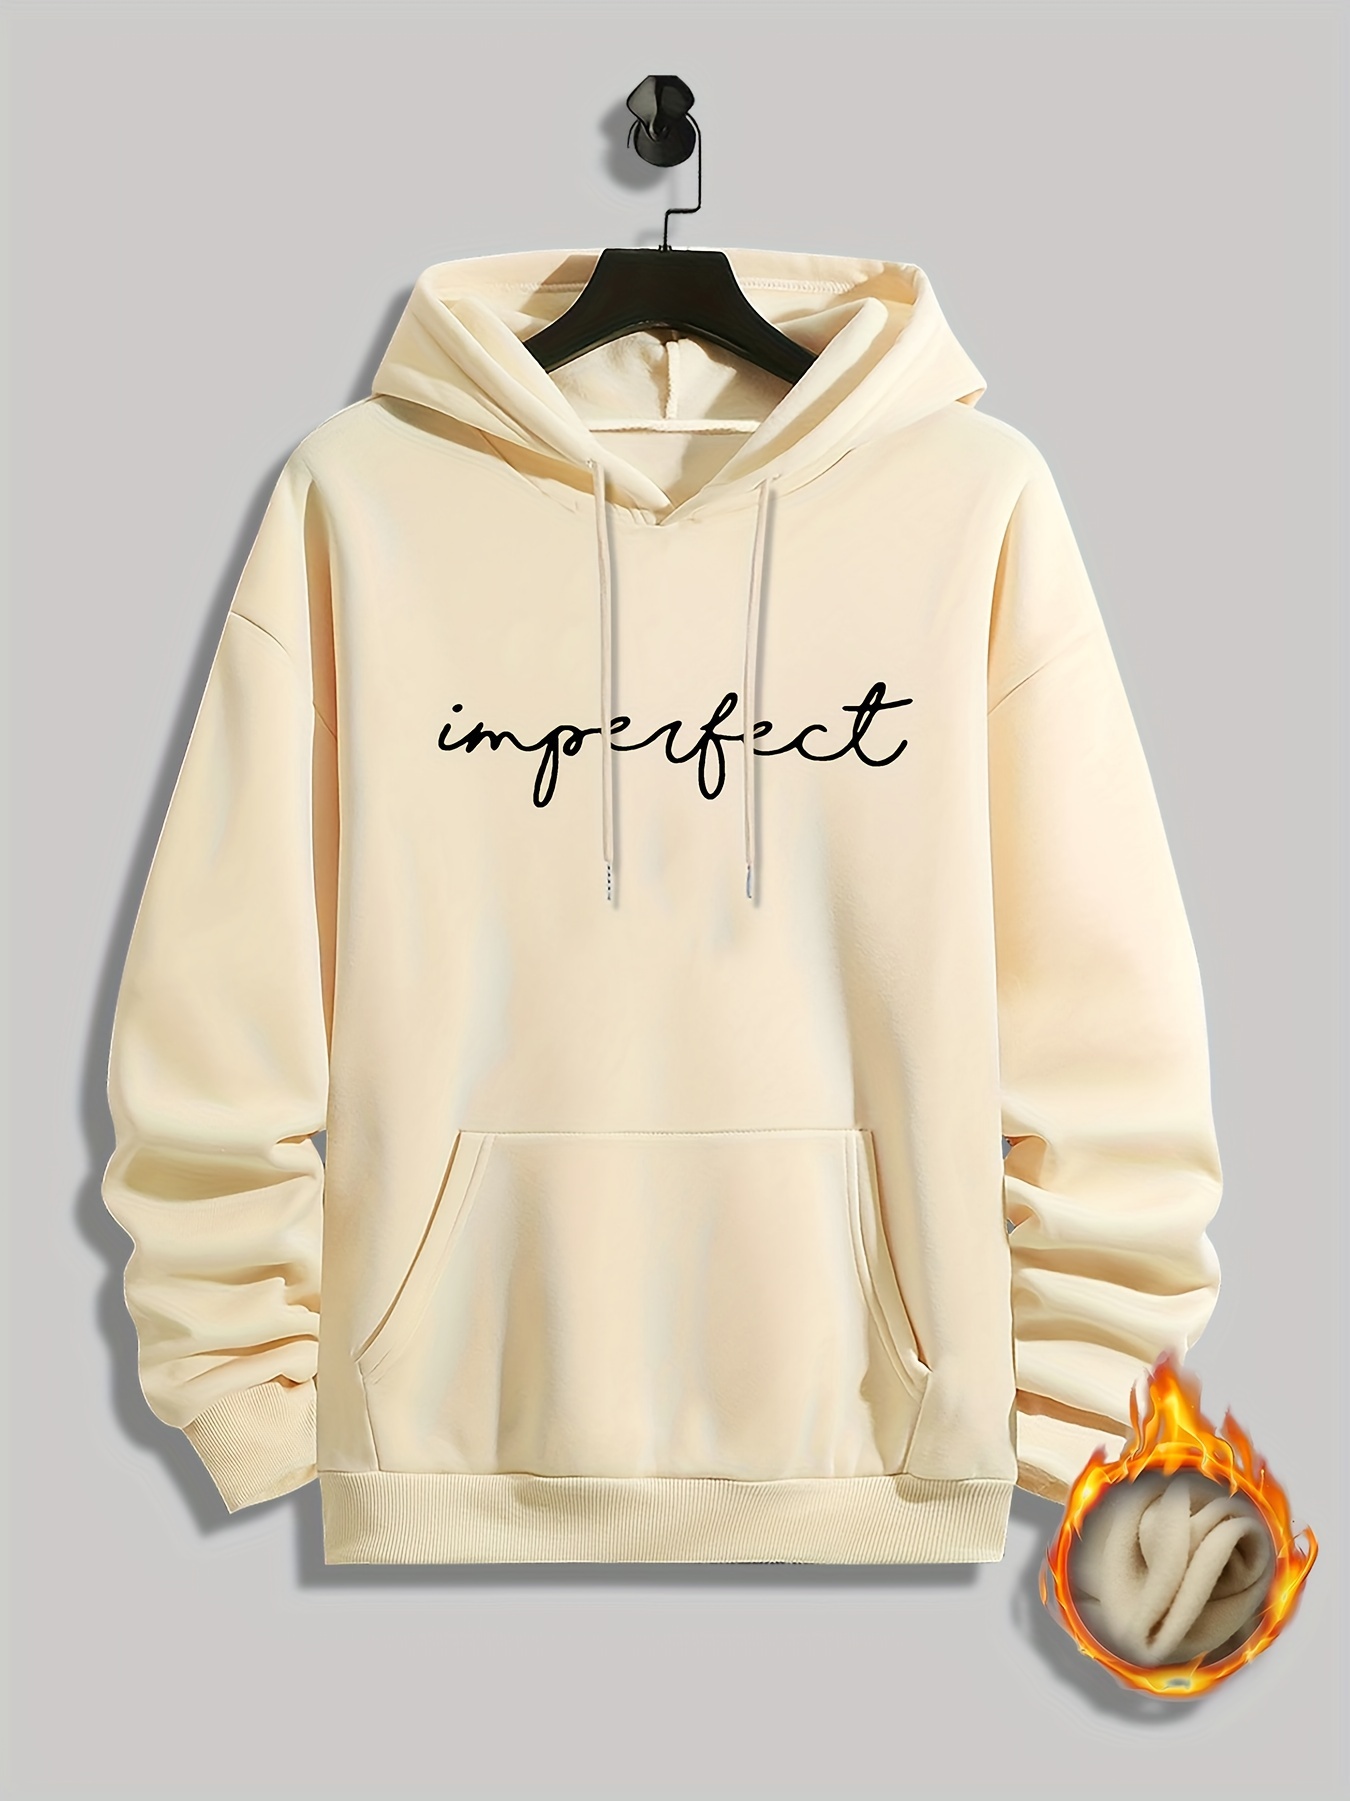 Imperfect Print Kangaroo Pocket Sweatshirt Hoodie Pullover, Fashion Street  Style Long Sleeve Sports Tops, Graphic Pullover Shirts For Men